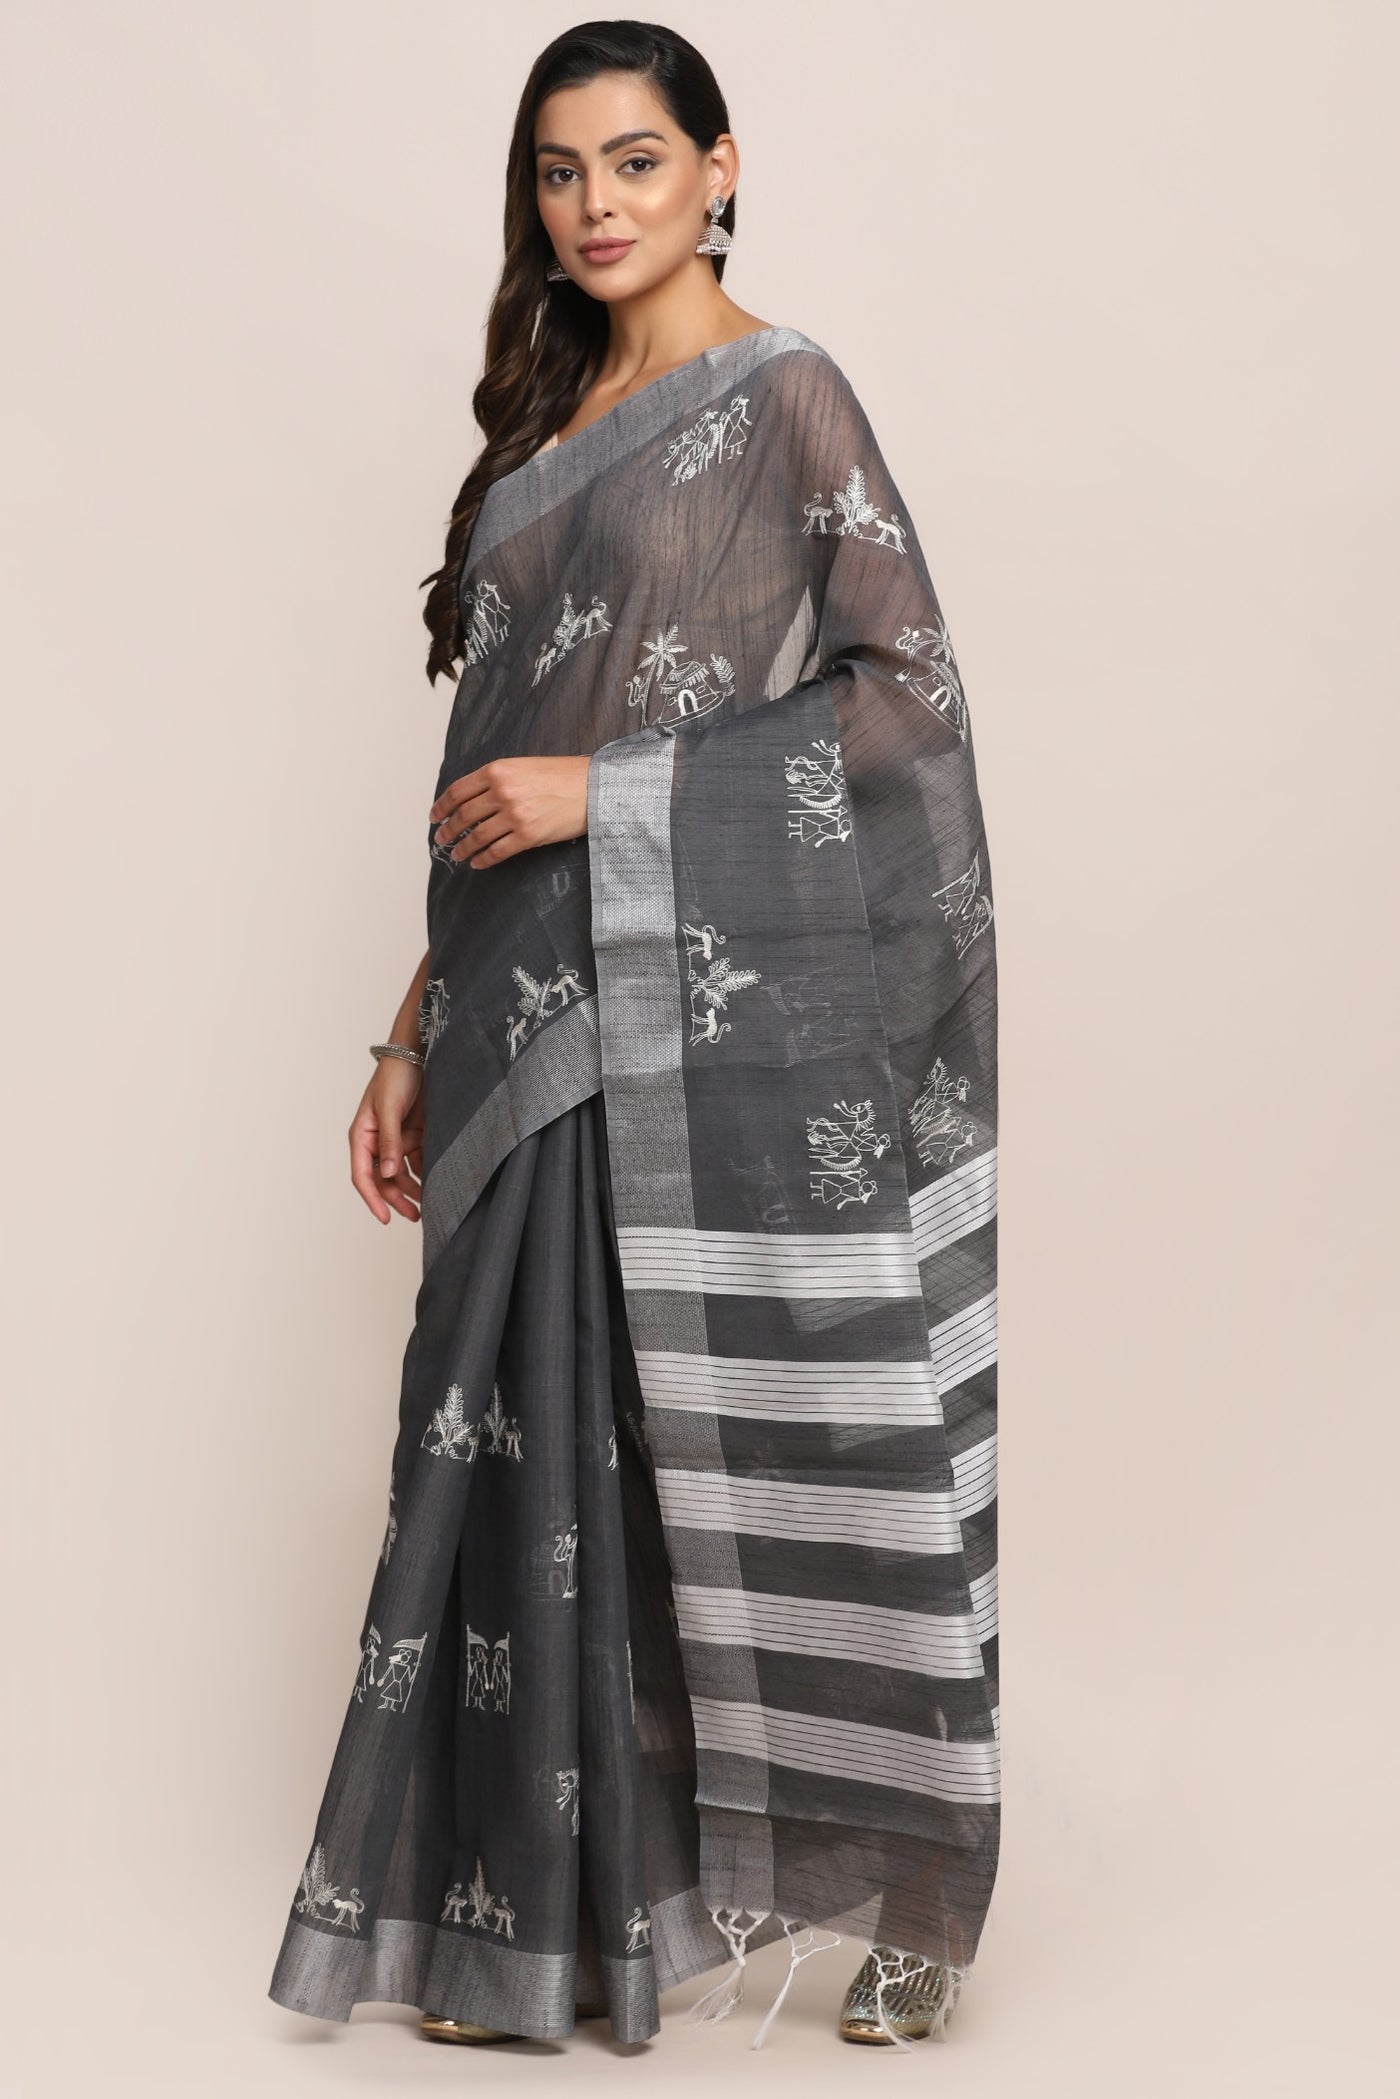 Classy grey color geometrical motif embroidered saree